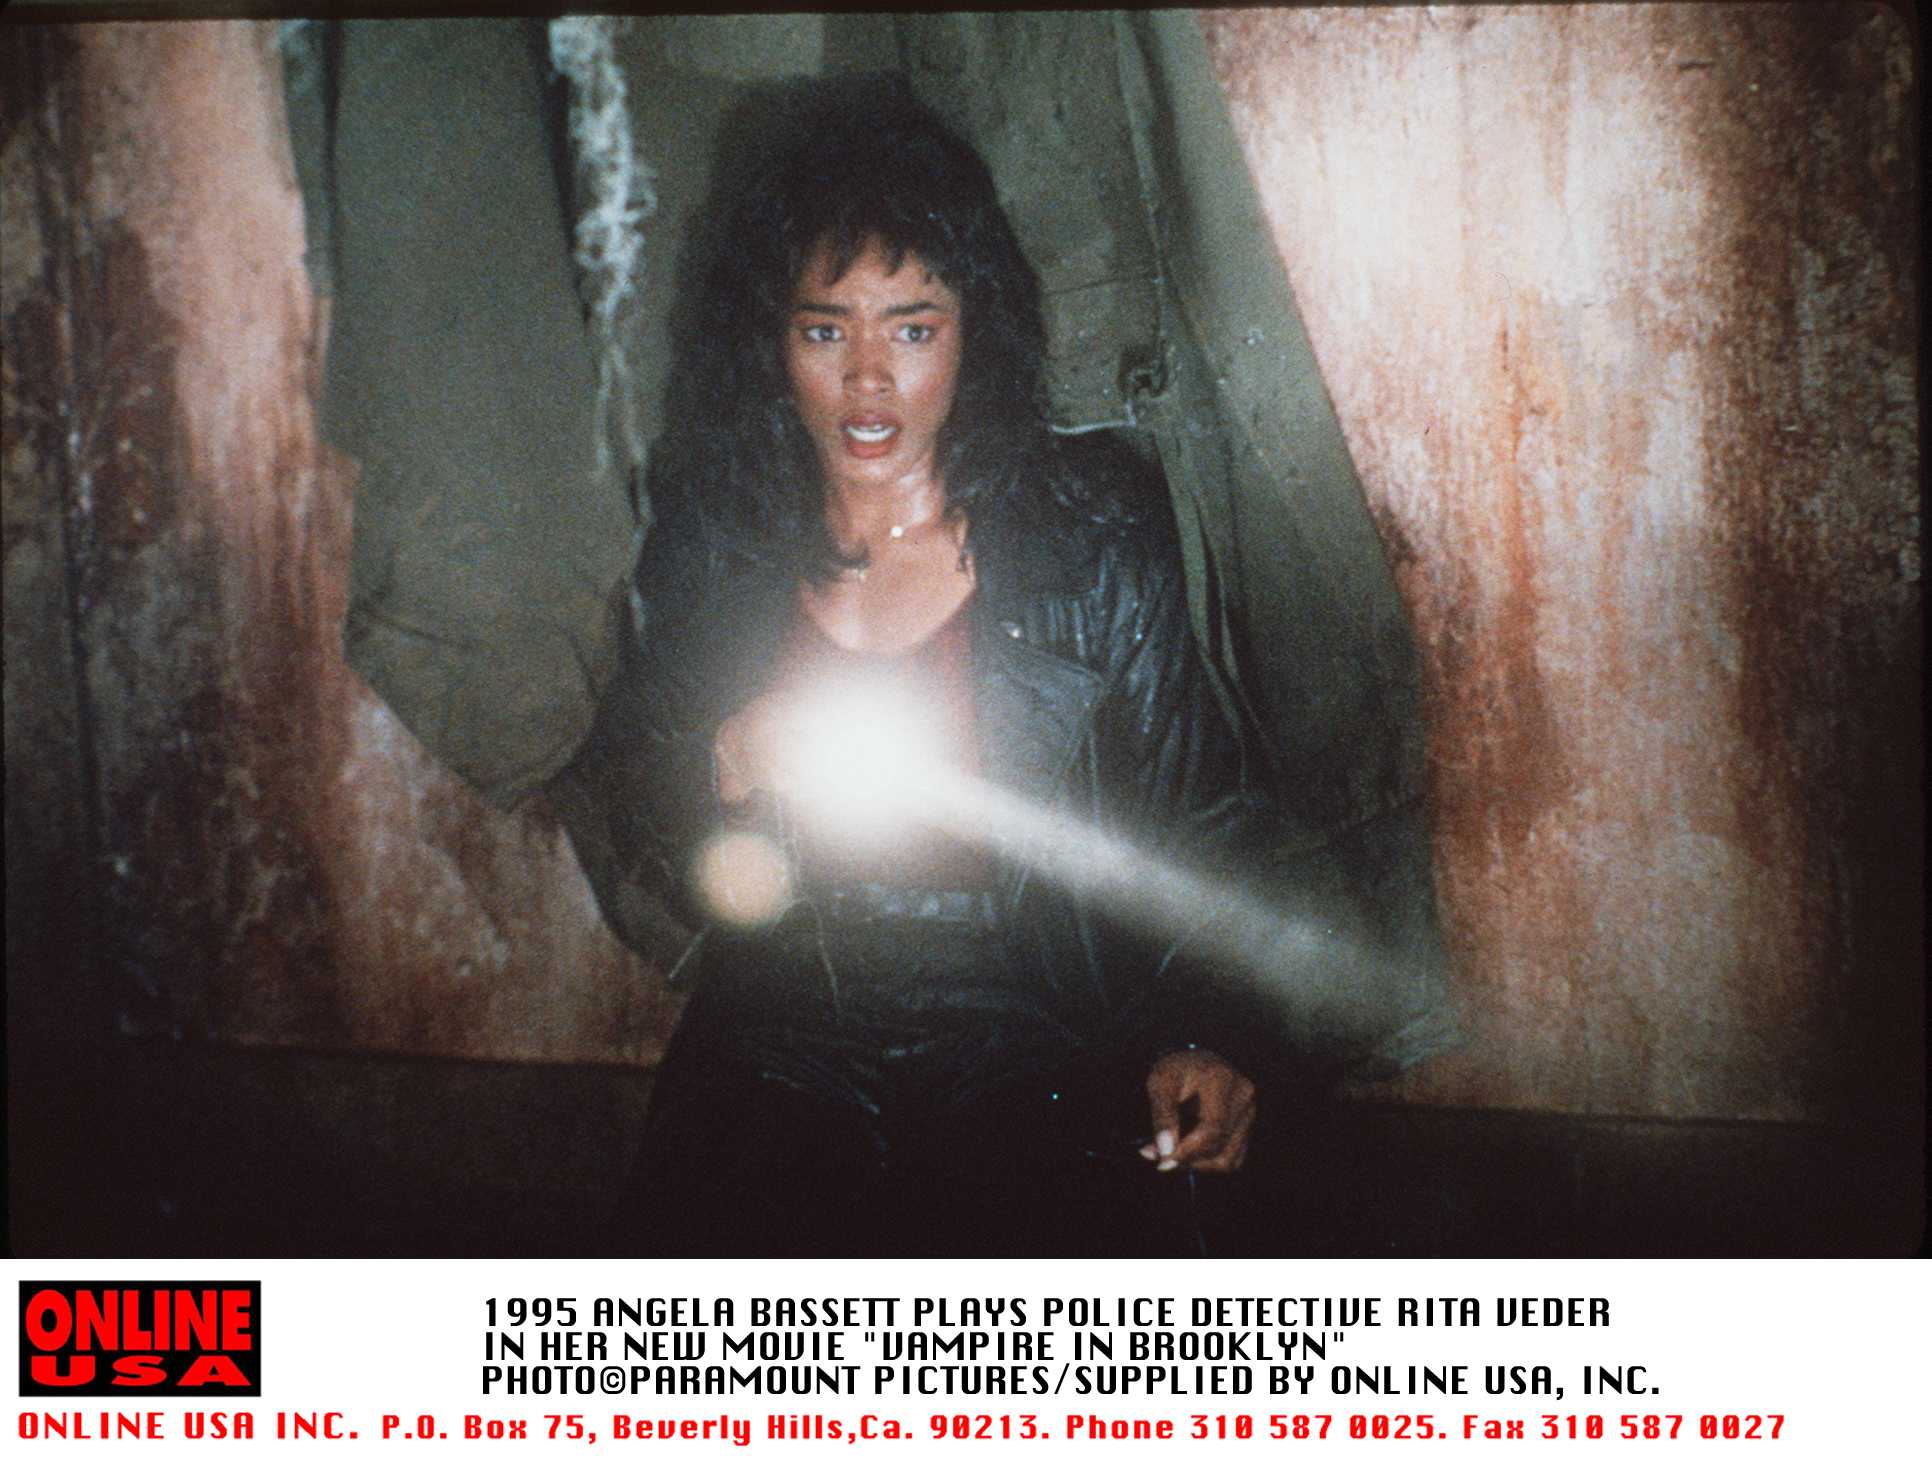 1995 ANGELA BASSETT IN VAMPIRE IN BROOKLYN, 7 Actors Who Starred In Horror Movies Before They Got Famous